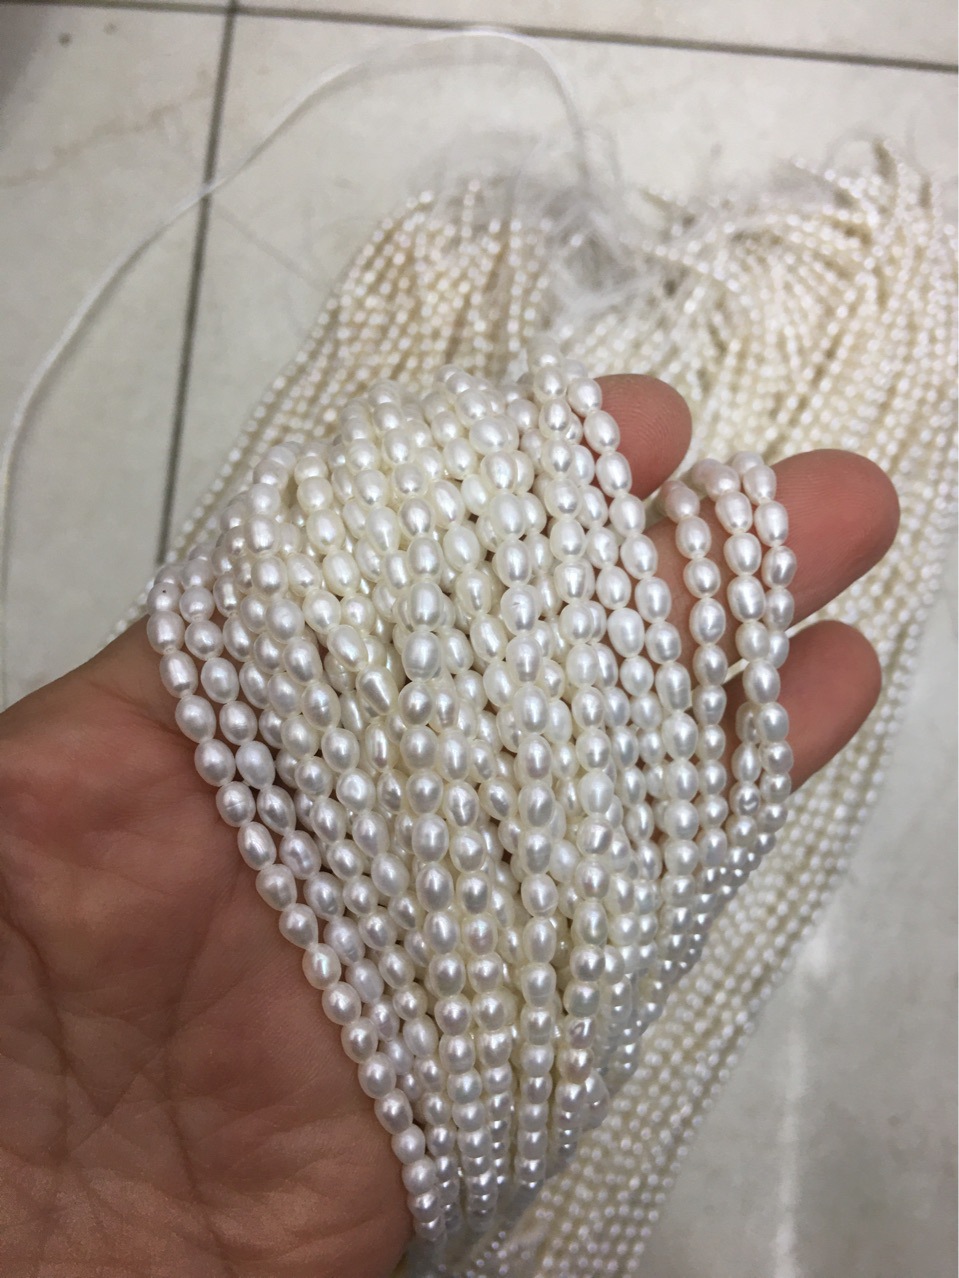 Natural freshwater pearls strands wholesale natural pearls cheap loose pearls from BAOYUE PEARL